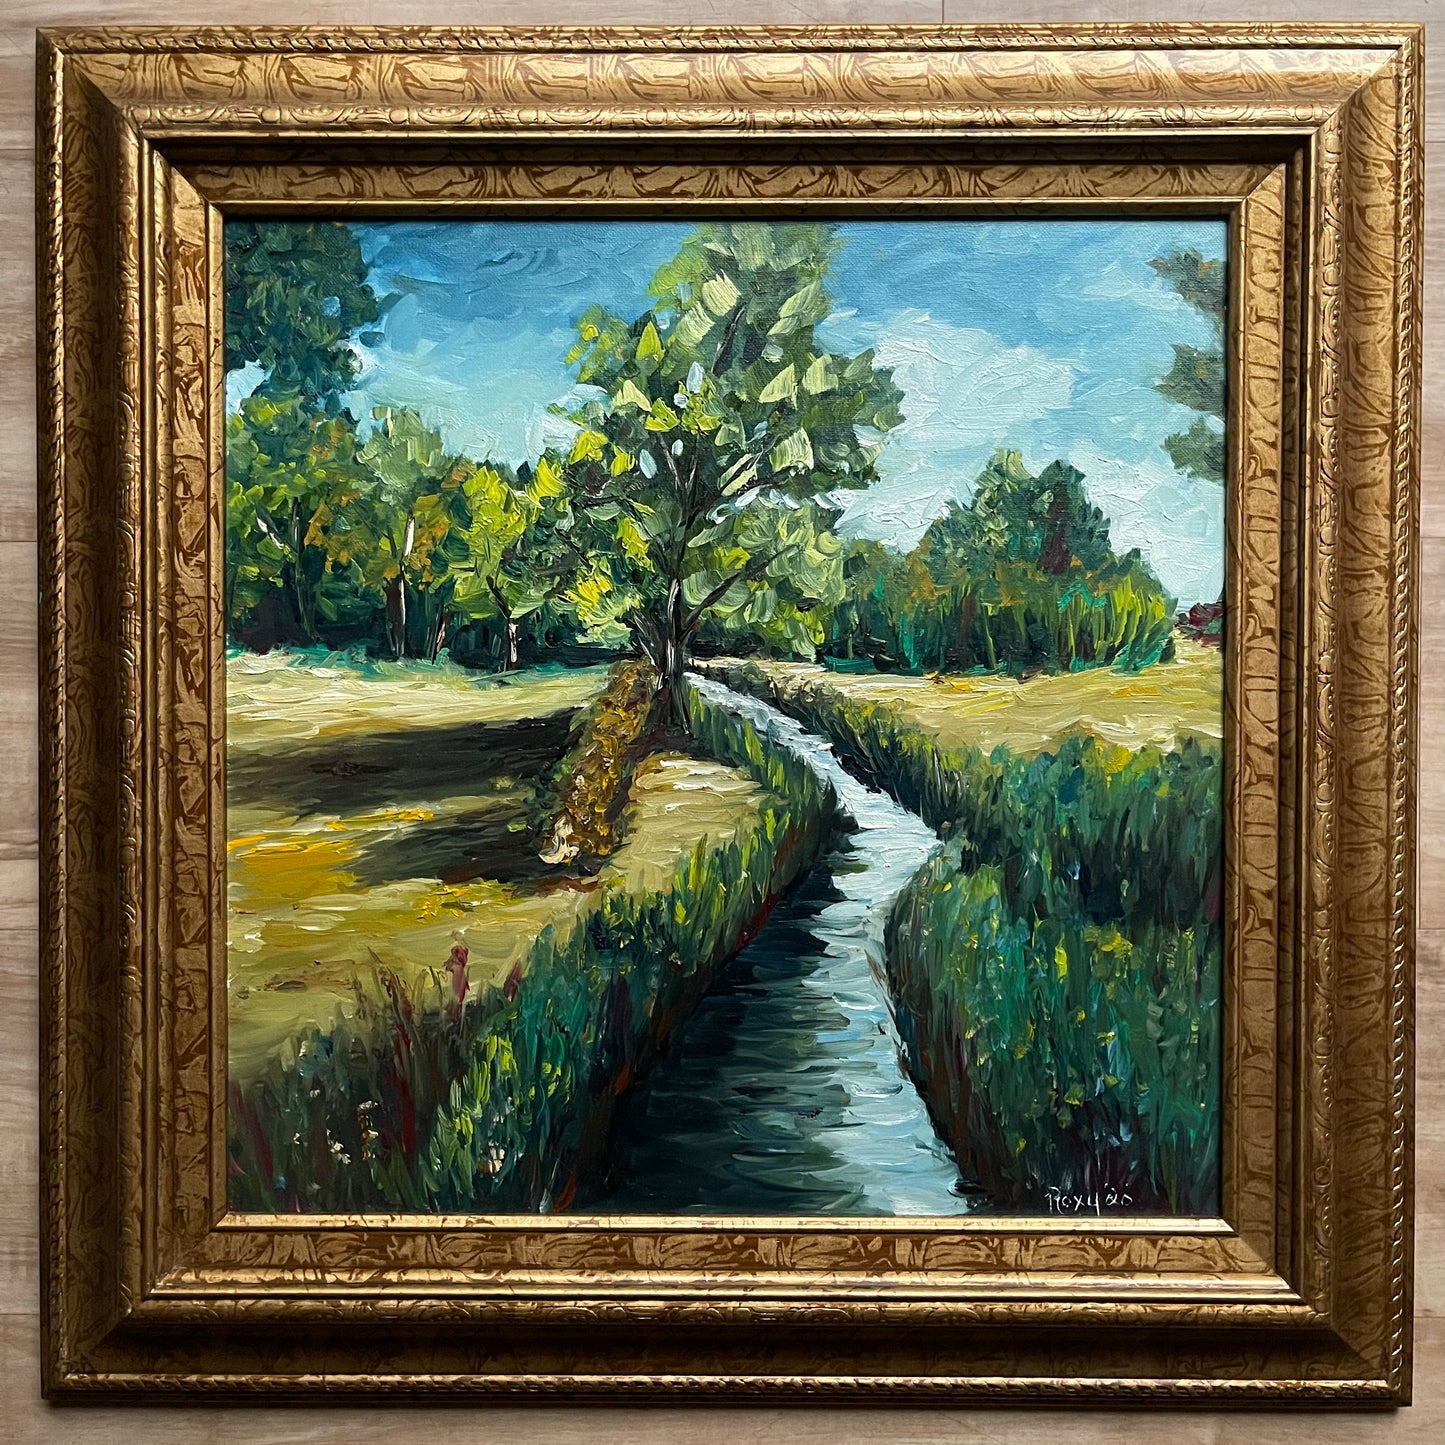 A Countryside View near the Old New Inn Cotswolds -Original Contemporary Impressionism Oil Landscape Painting Framed